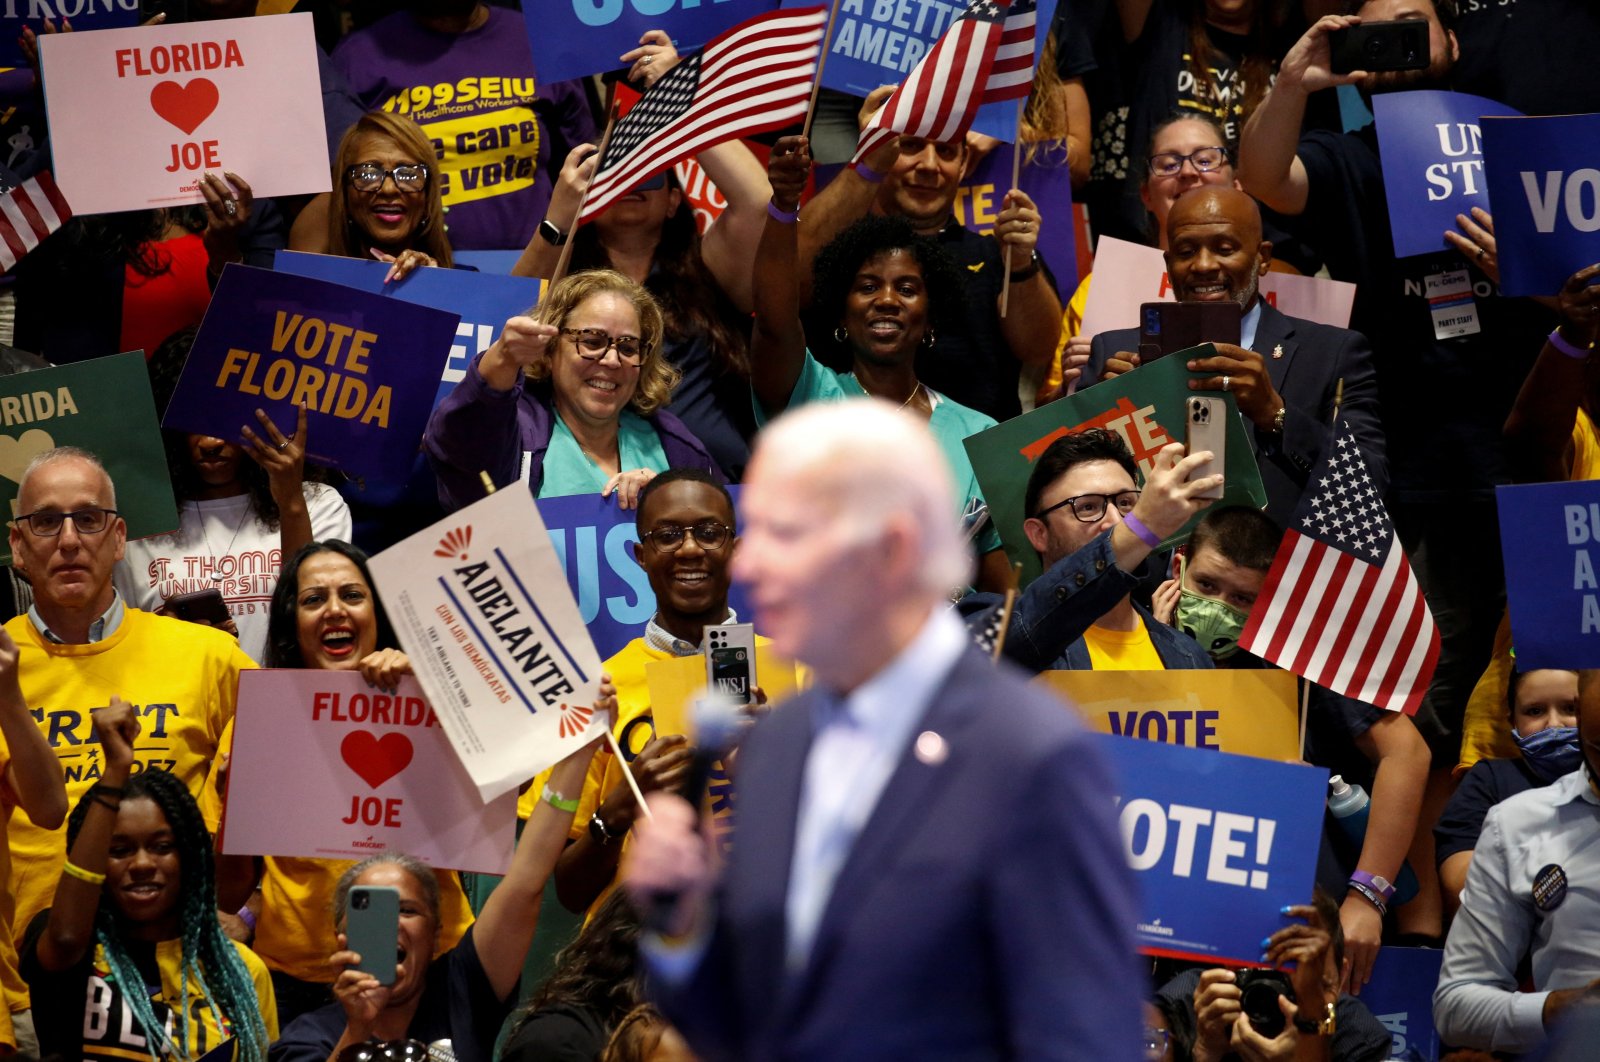 People react as U.S. President Joe Biden takes the stage during a campaign rally in Florida, U.S., Nov. 1, 2022. (Reuters Photo)